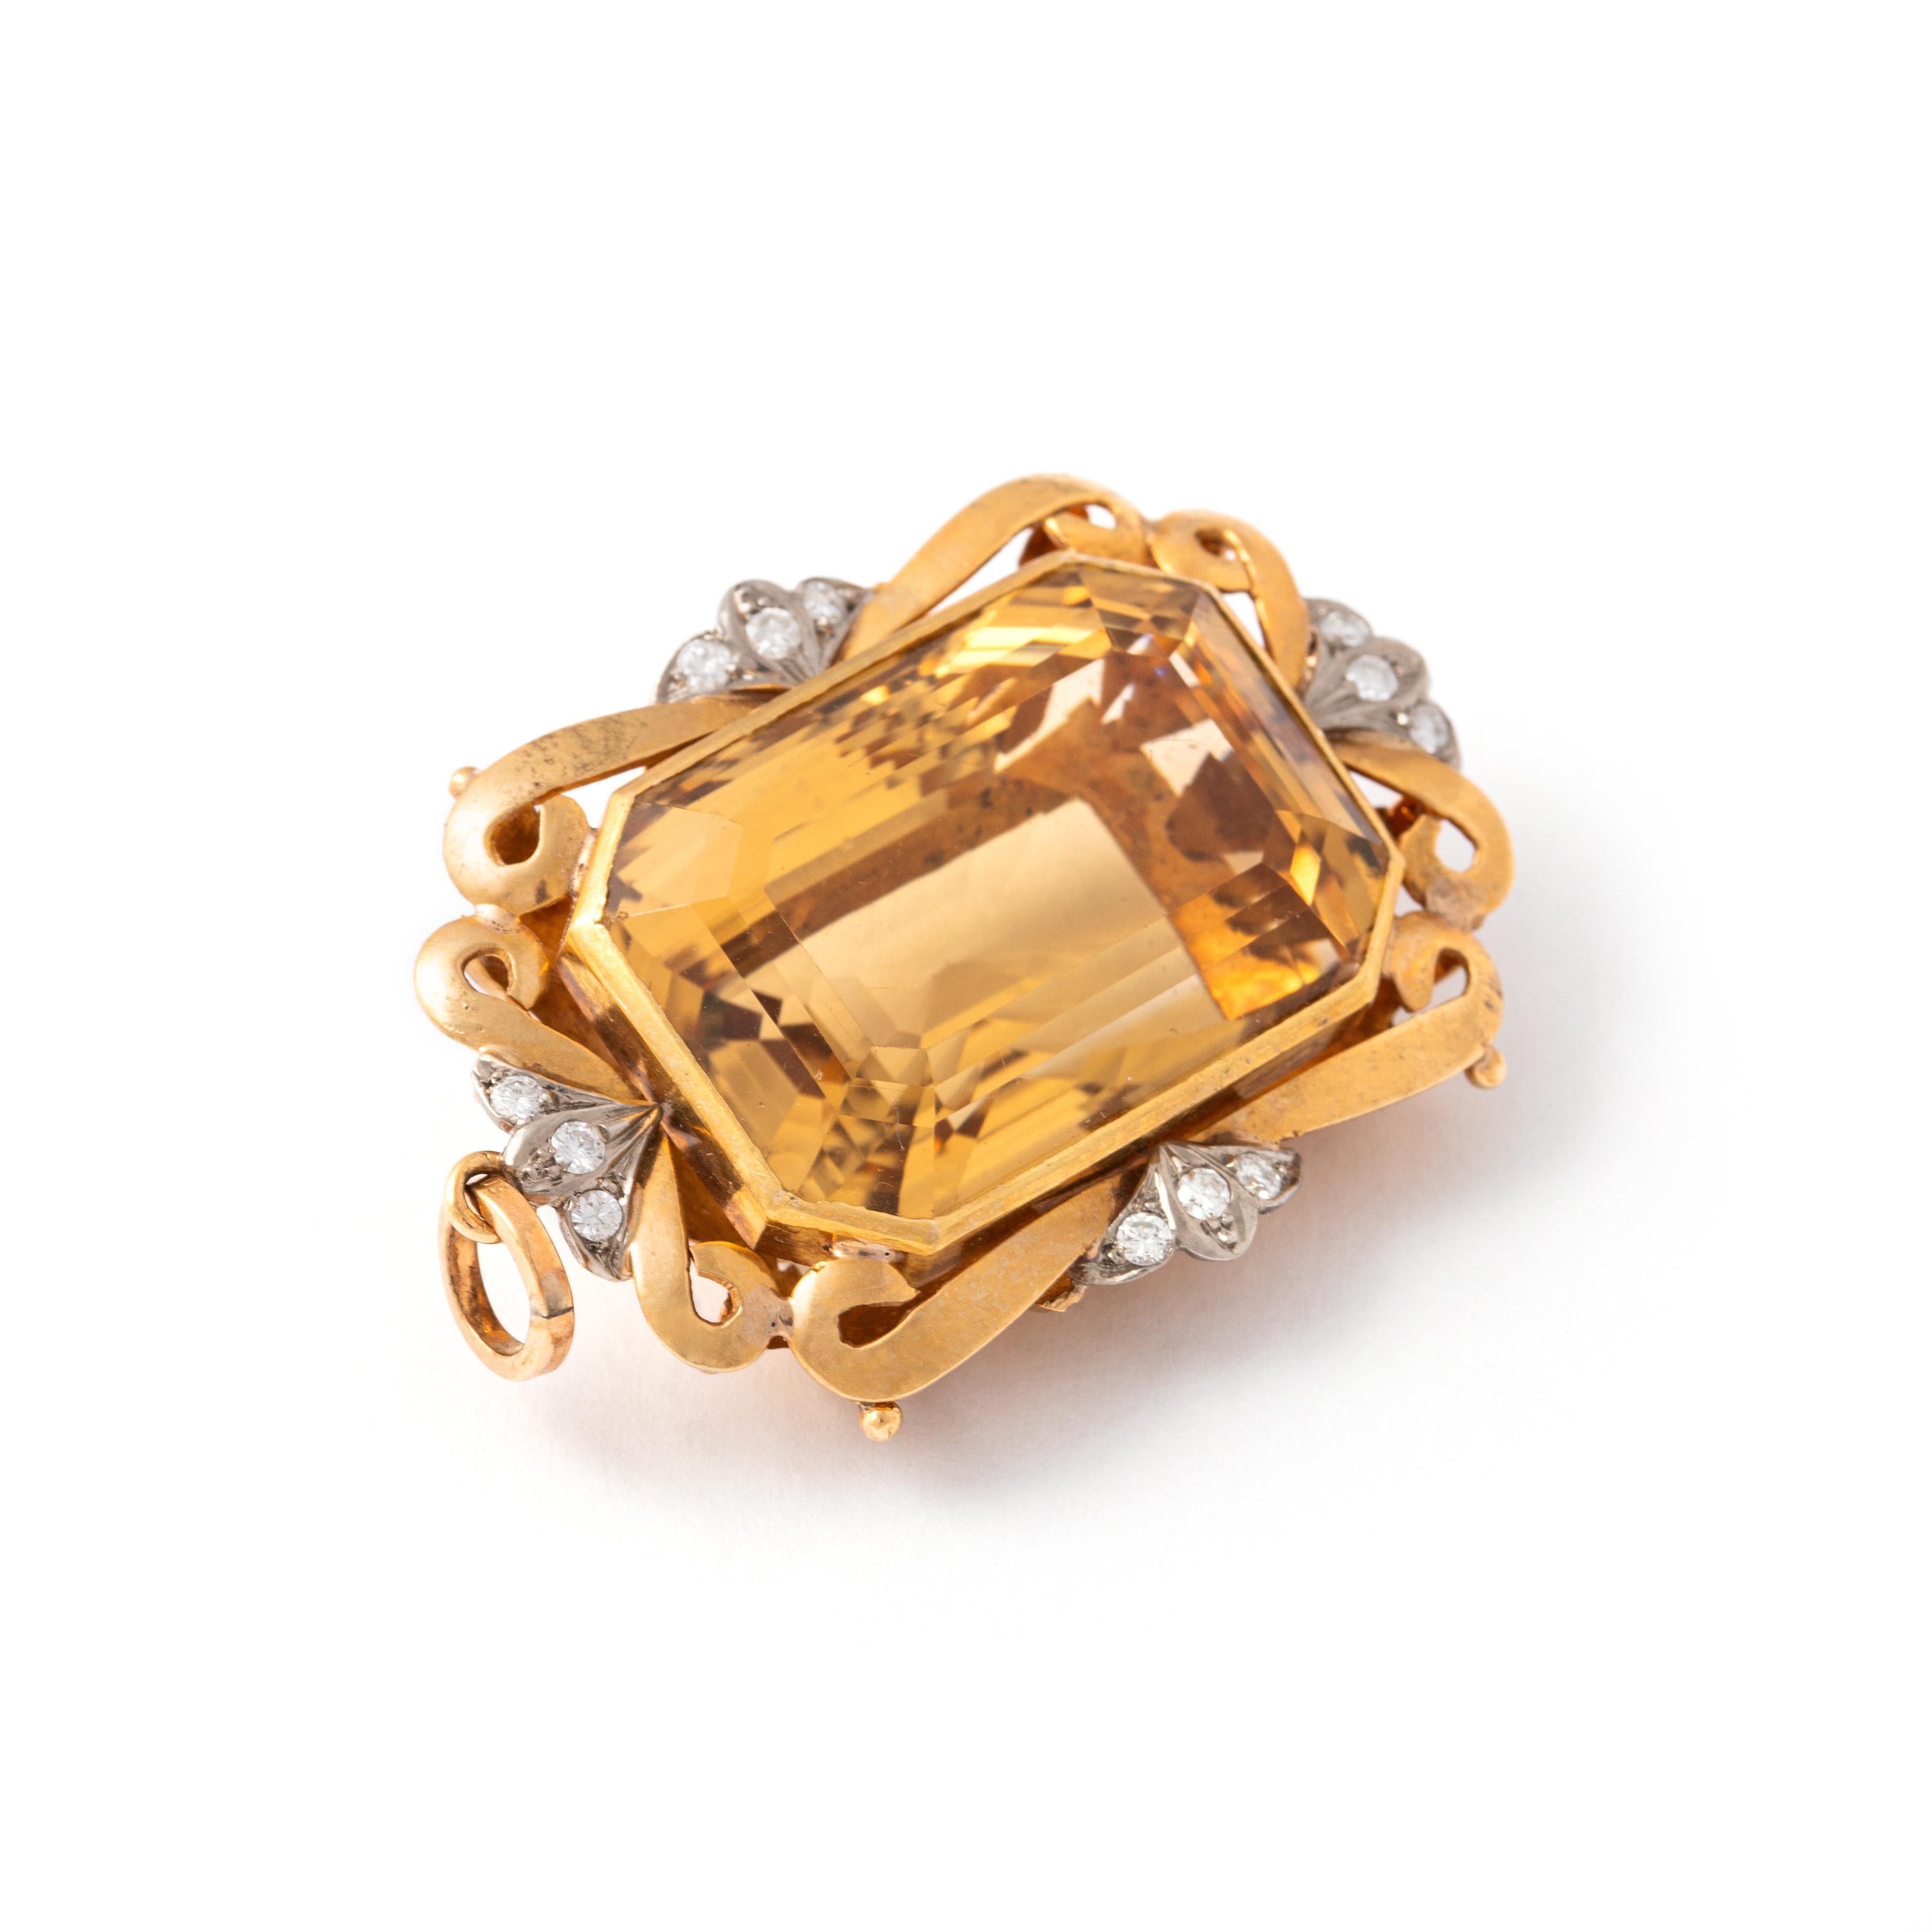 Citrine Diamond Yellow Gold Pendant .
Total height: approx. 4.60 centimeters.
Total width: approx. 2.80 centimeters.

Total weight: 26.07 grams.
